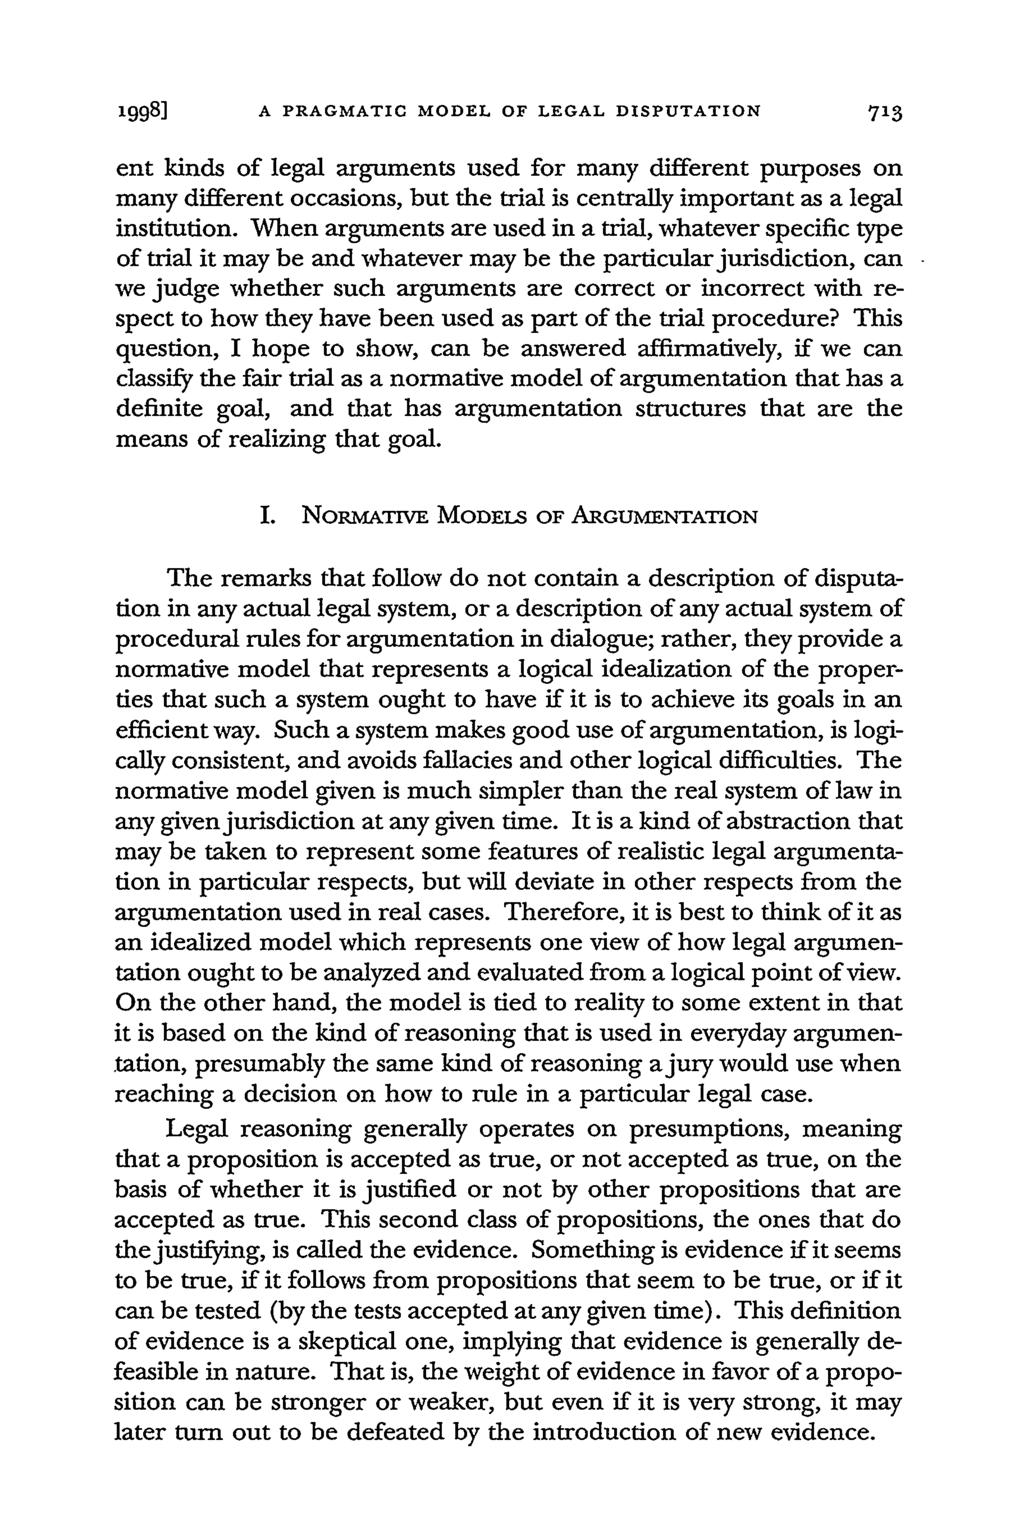 1998] A PRAGMATIC MODEL OF LEGAL DISPUTATION 713 ent kinds of legal arguments used for many different purposes on many different occasions, but the trial is centrally important as a legal institution.